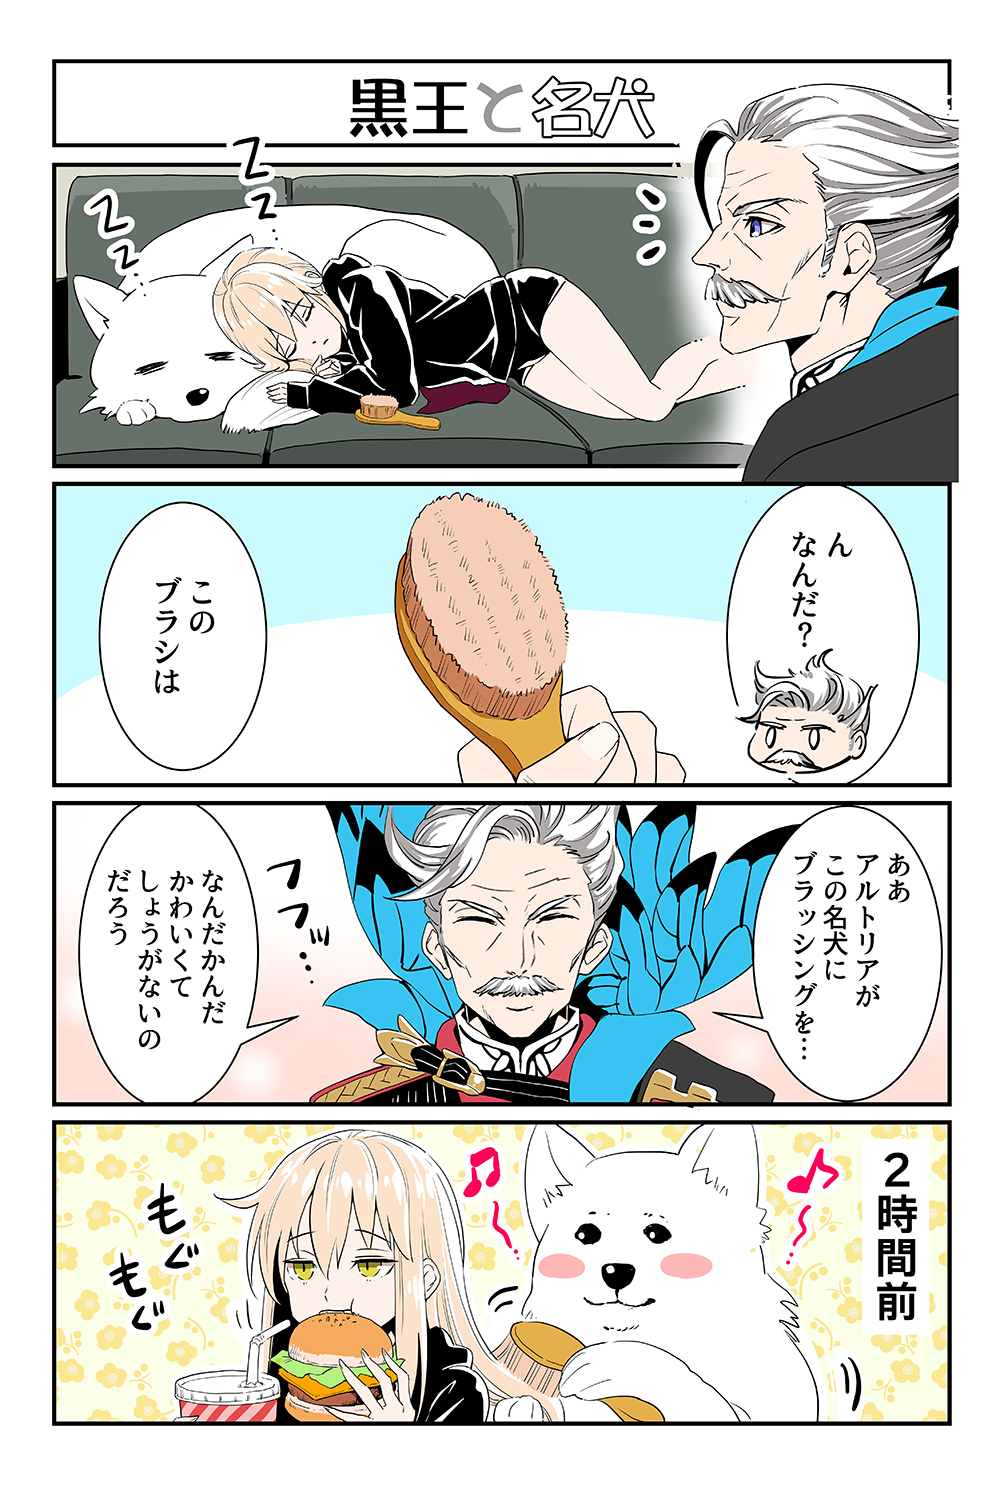 1boy 1girl alternate_costume blonde_hair blue_eyes brush butterfly comic dog eating facial_hair fate/grand_order fate_(series) food formal hair_brushing hamburger highres jacket james_moriarty_(fate/grand_order) mustache saber saber_alter suishougensou translation_request vest white_hair yellow_eyes